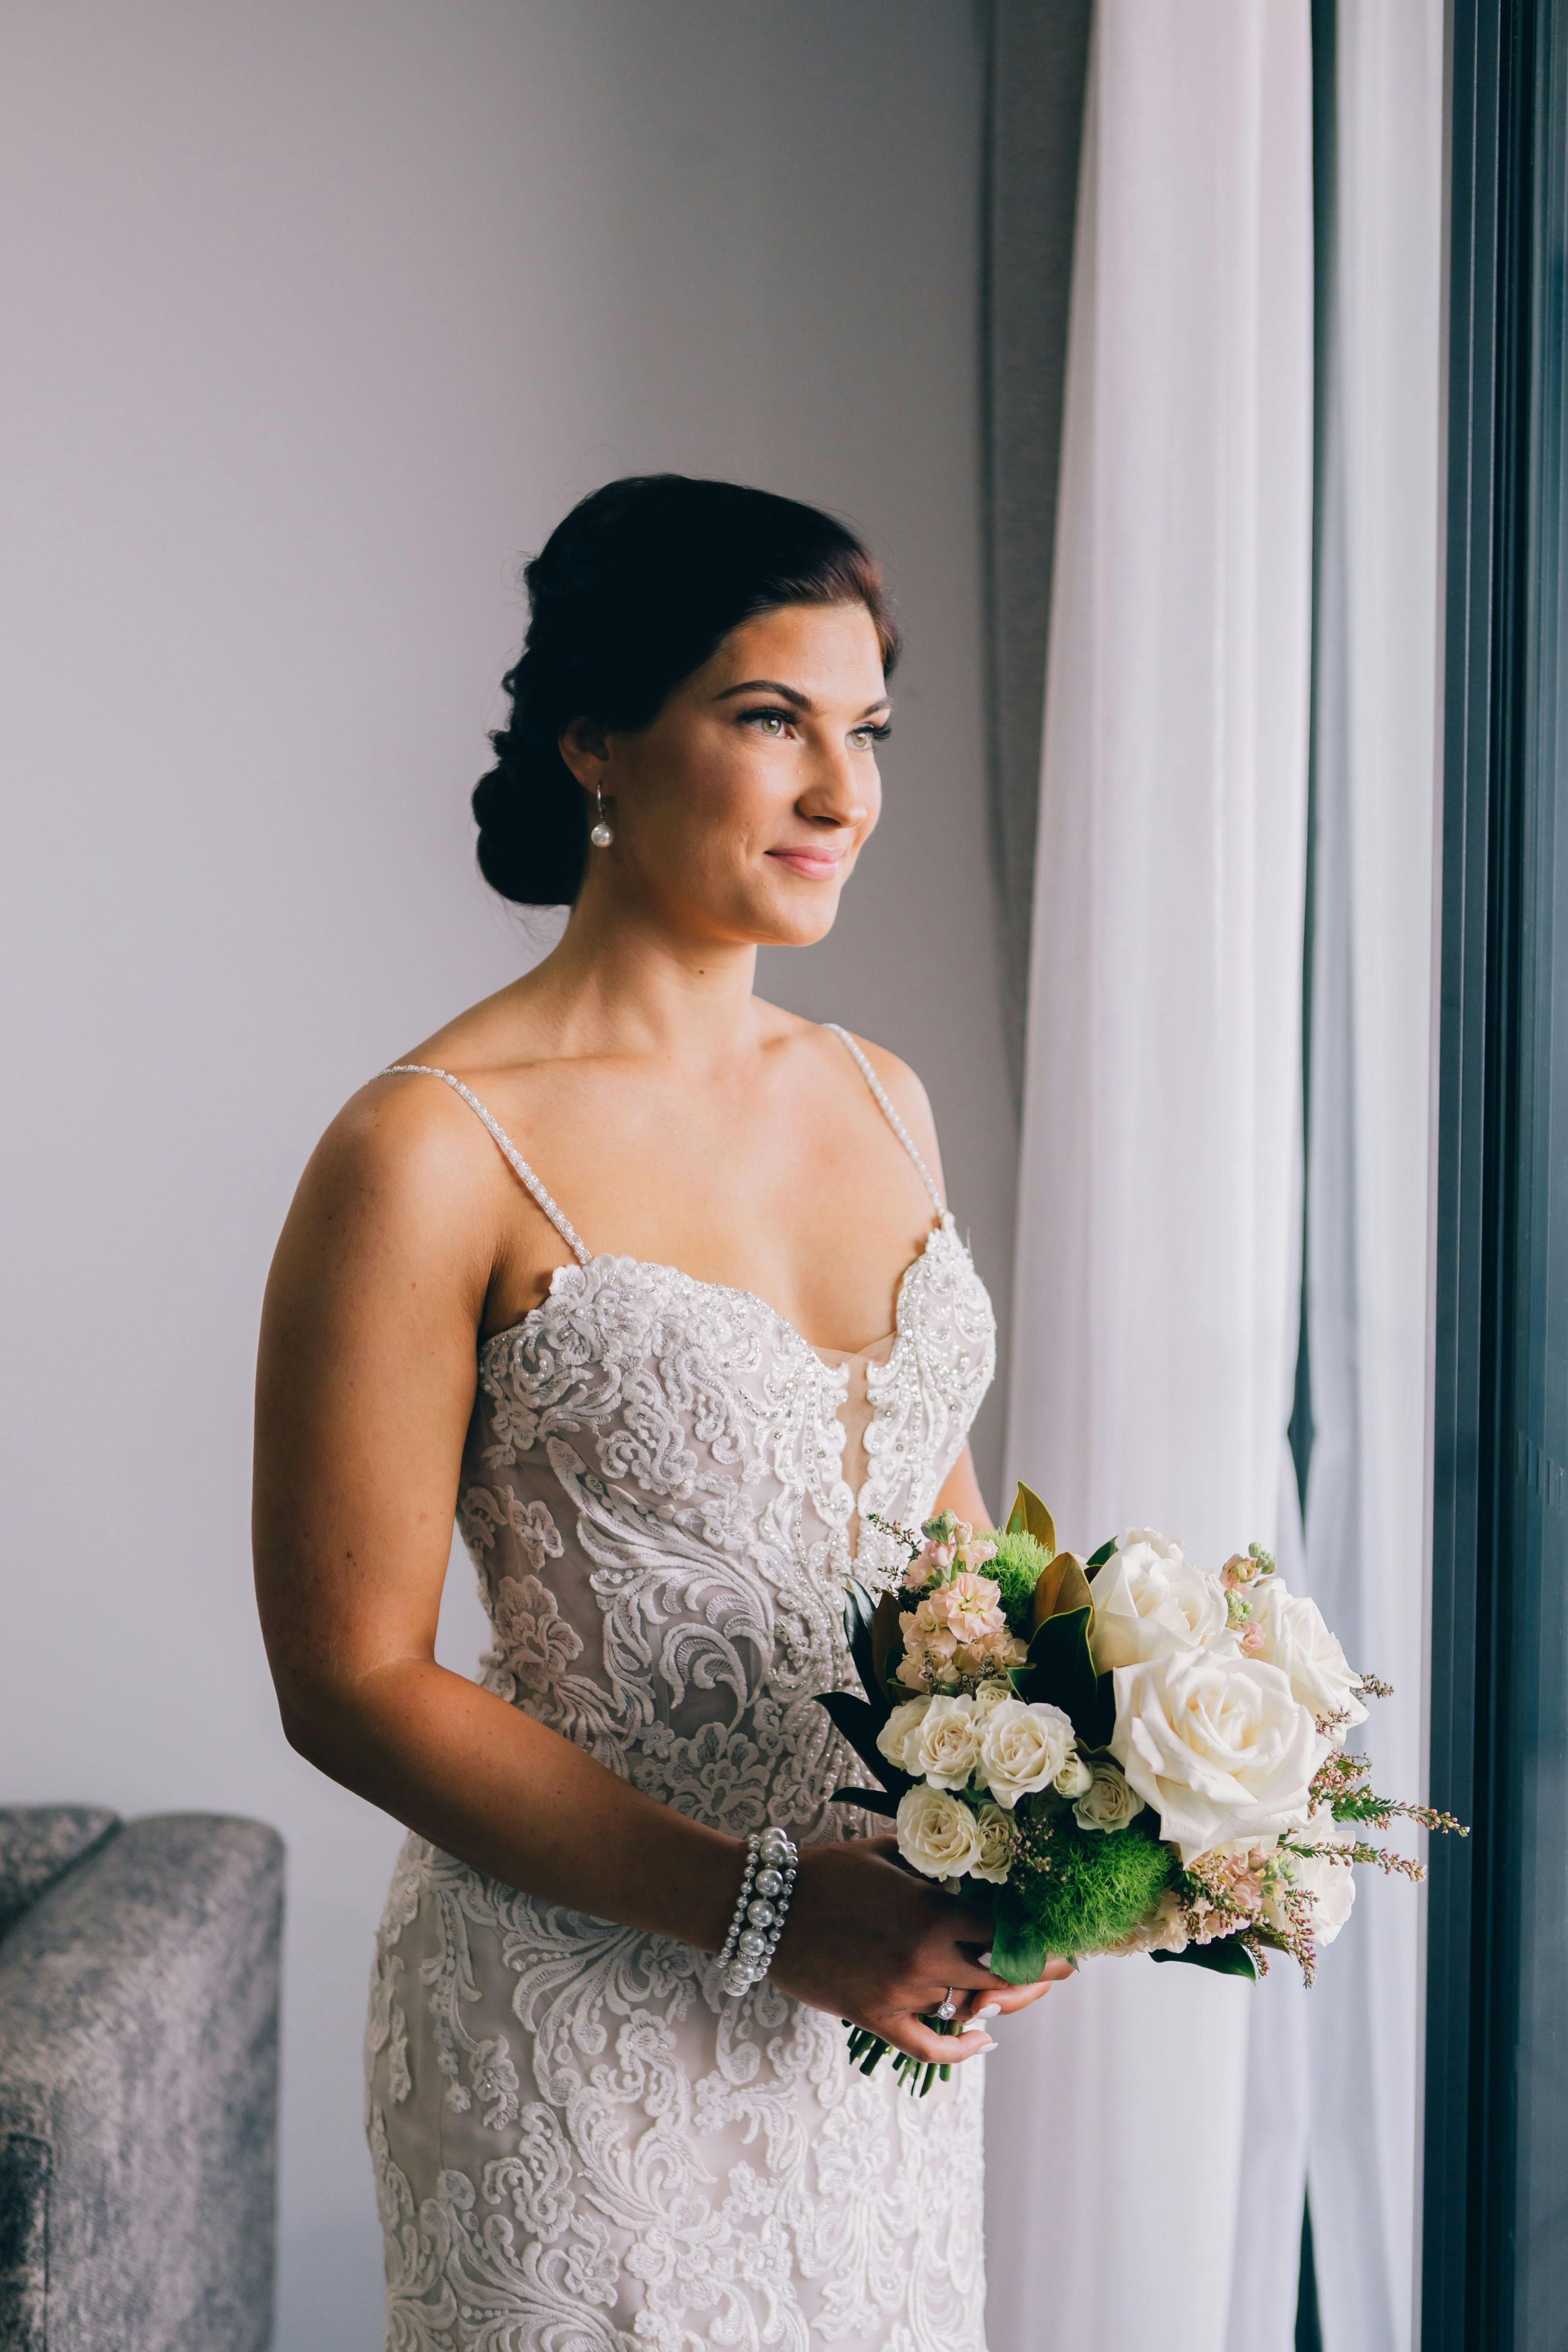 A Bride Holding a Bridal Bouquet · Free Stock Photo